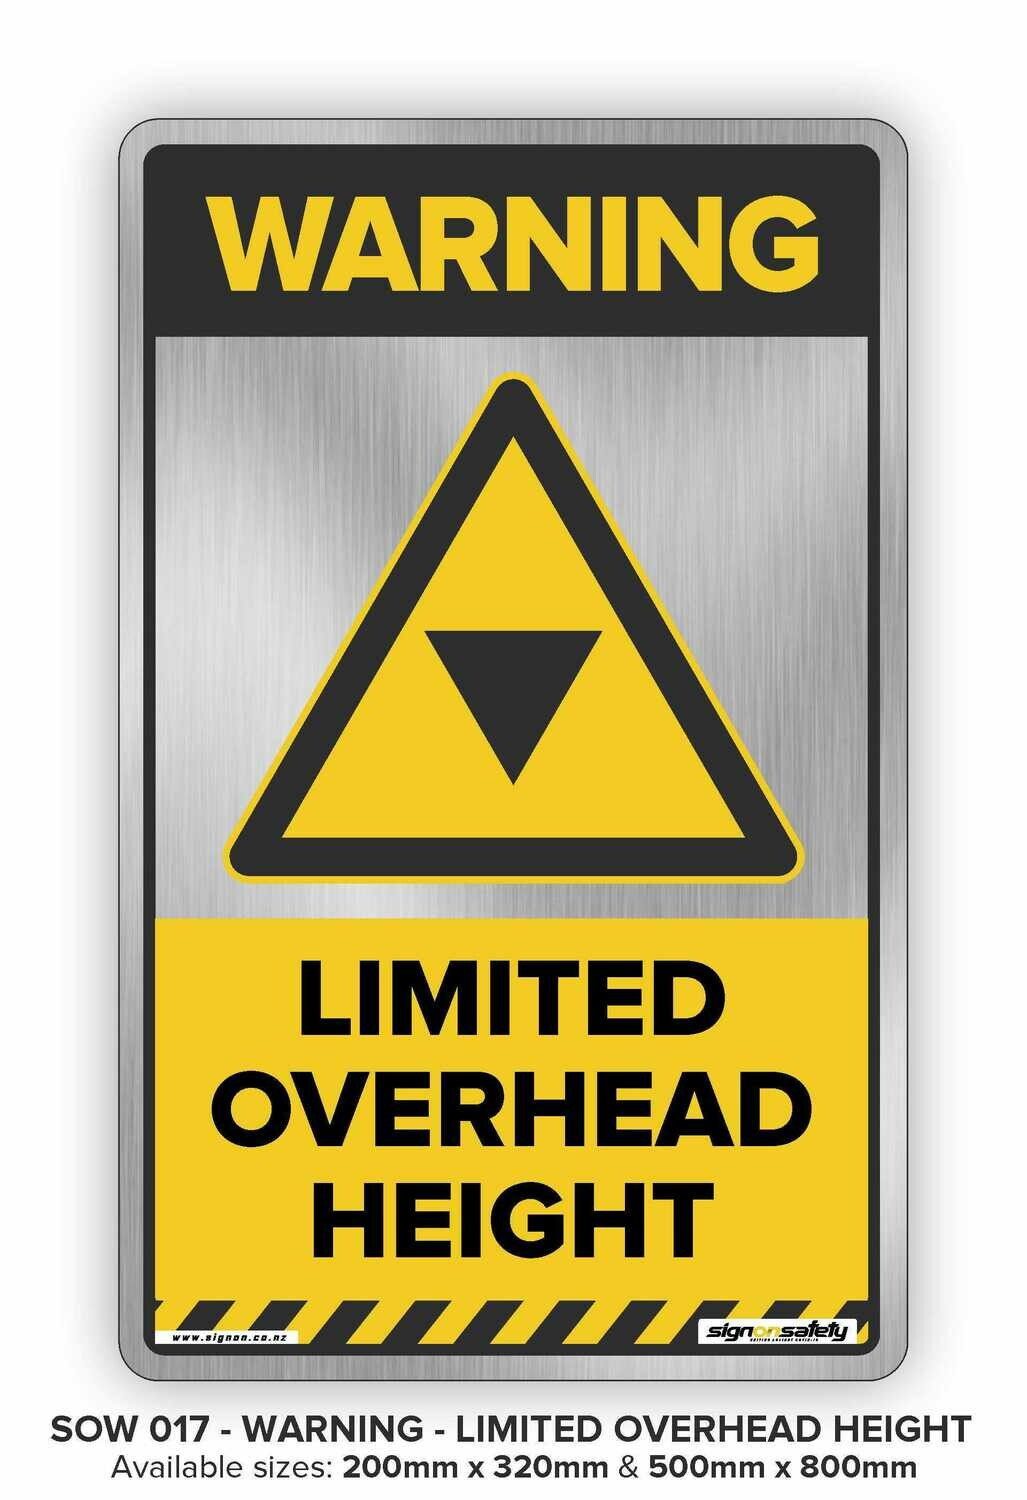 Warning - Limited Overhead Height